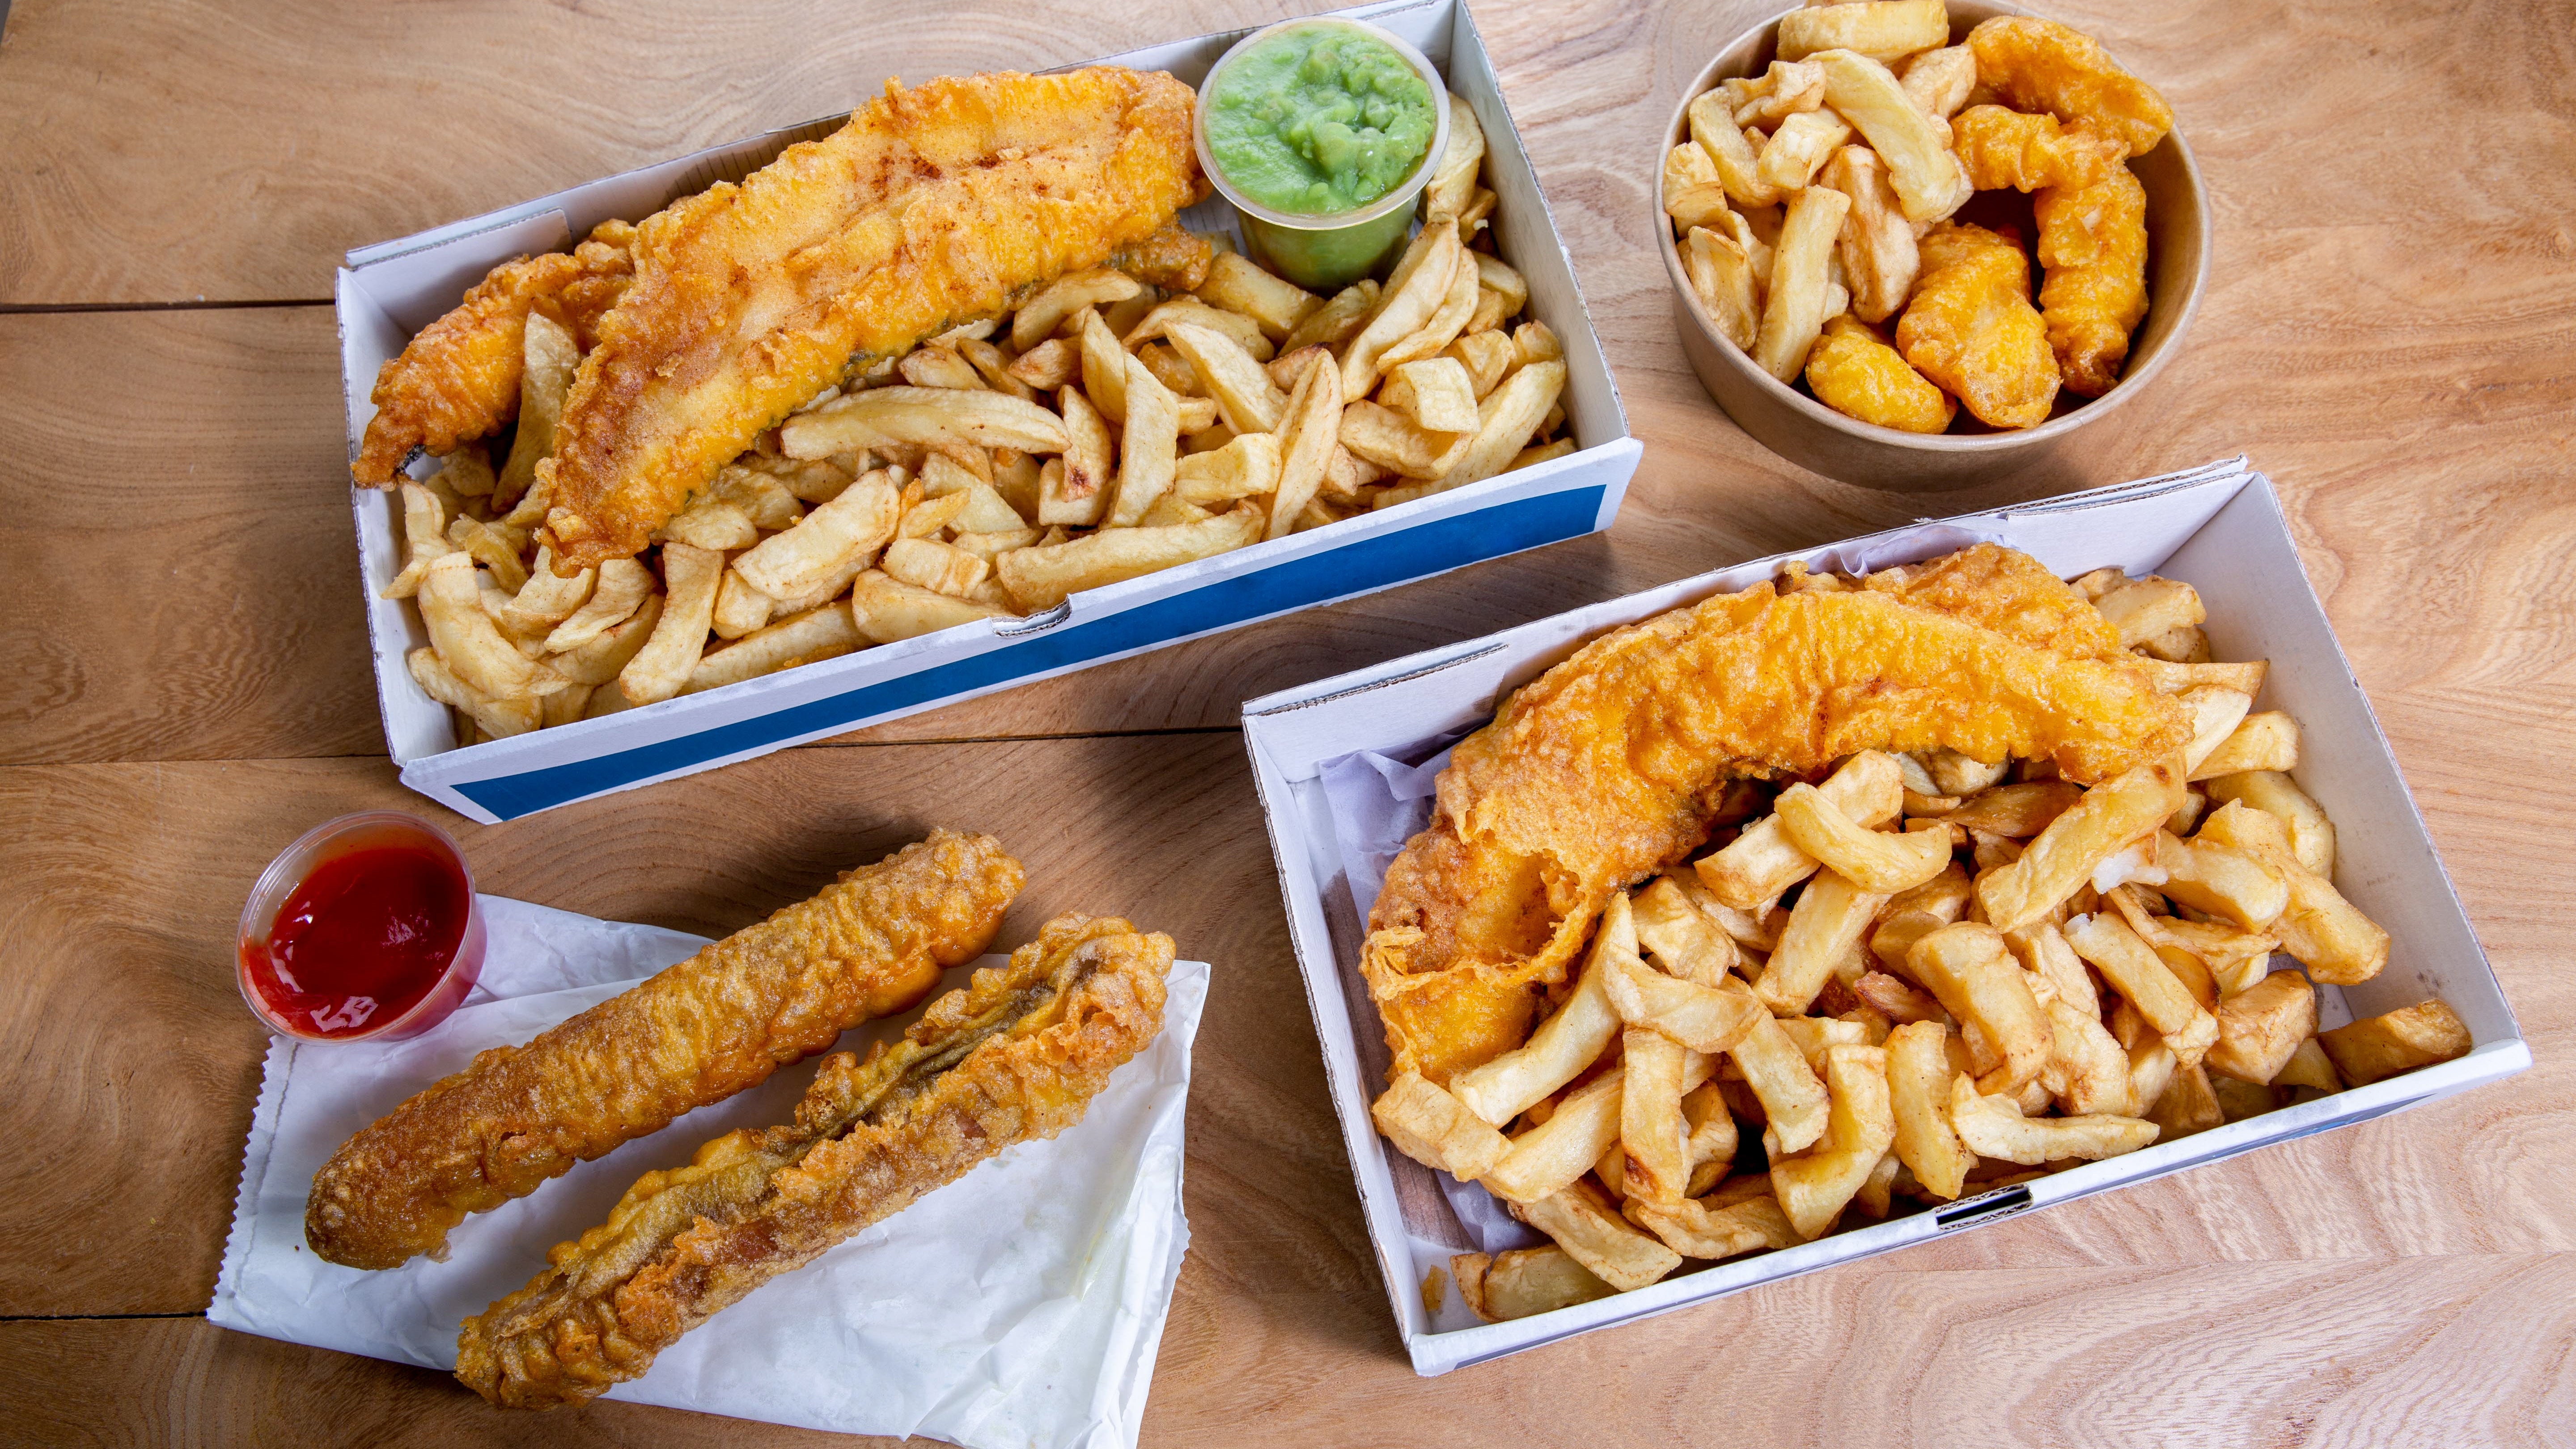 Island Fish and Chips